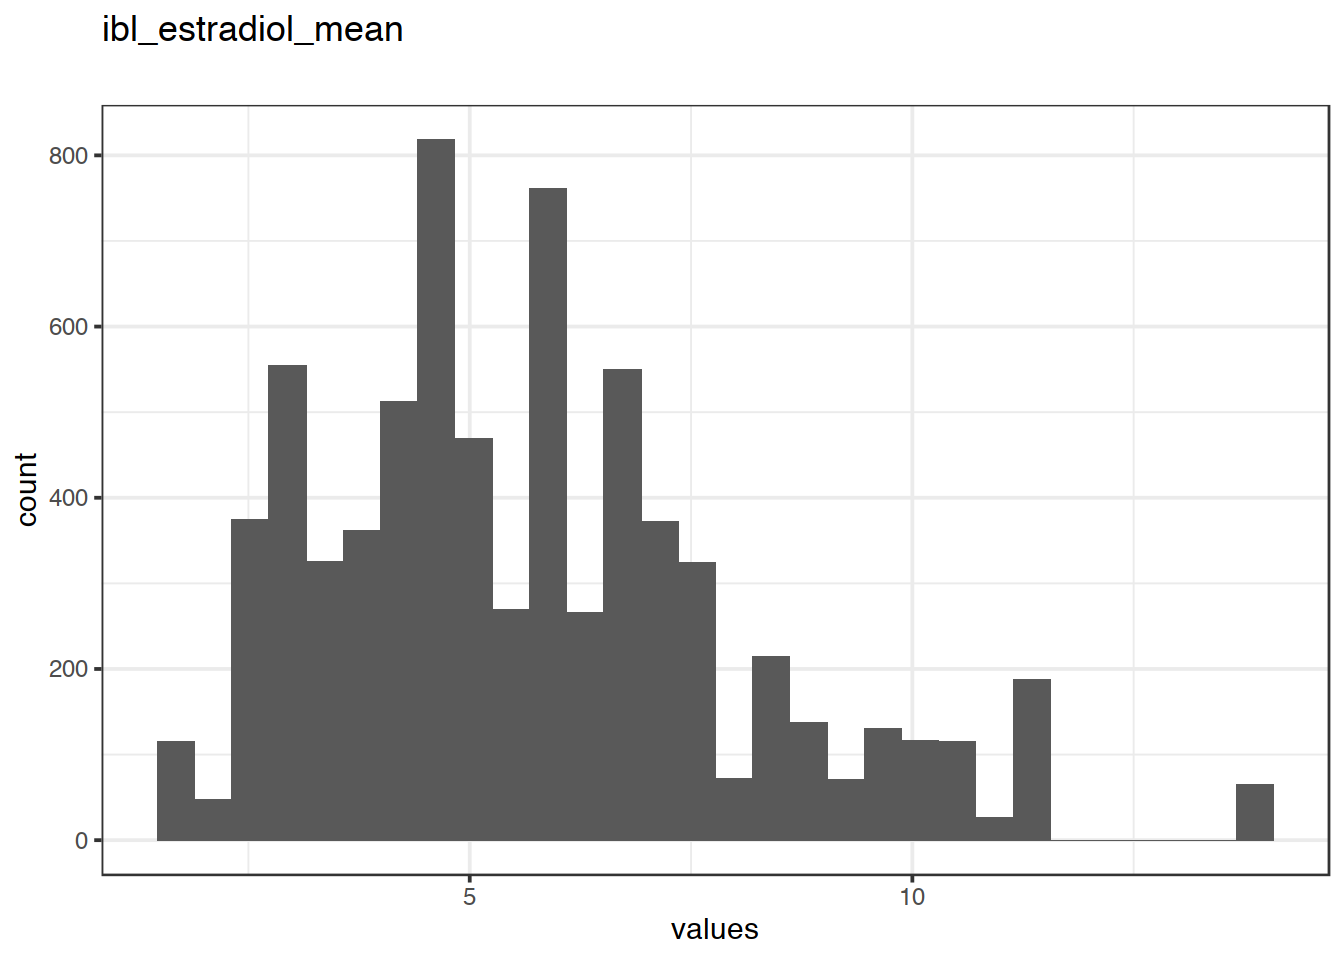 Distribution of values for ibl_estradiol_mean